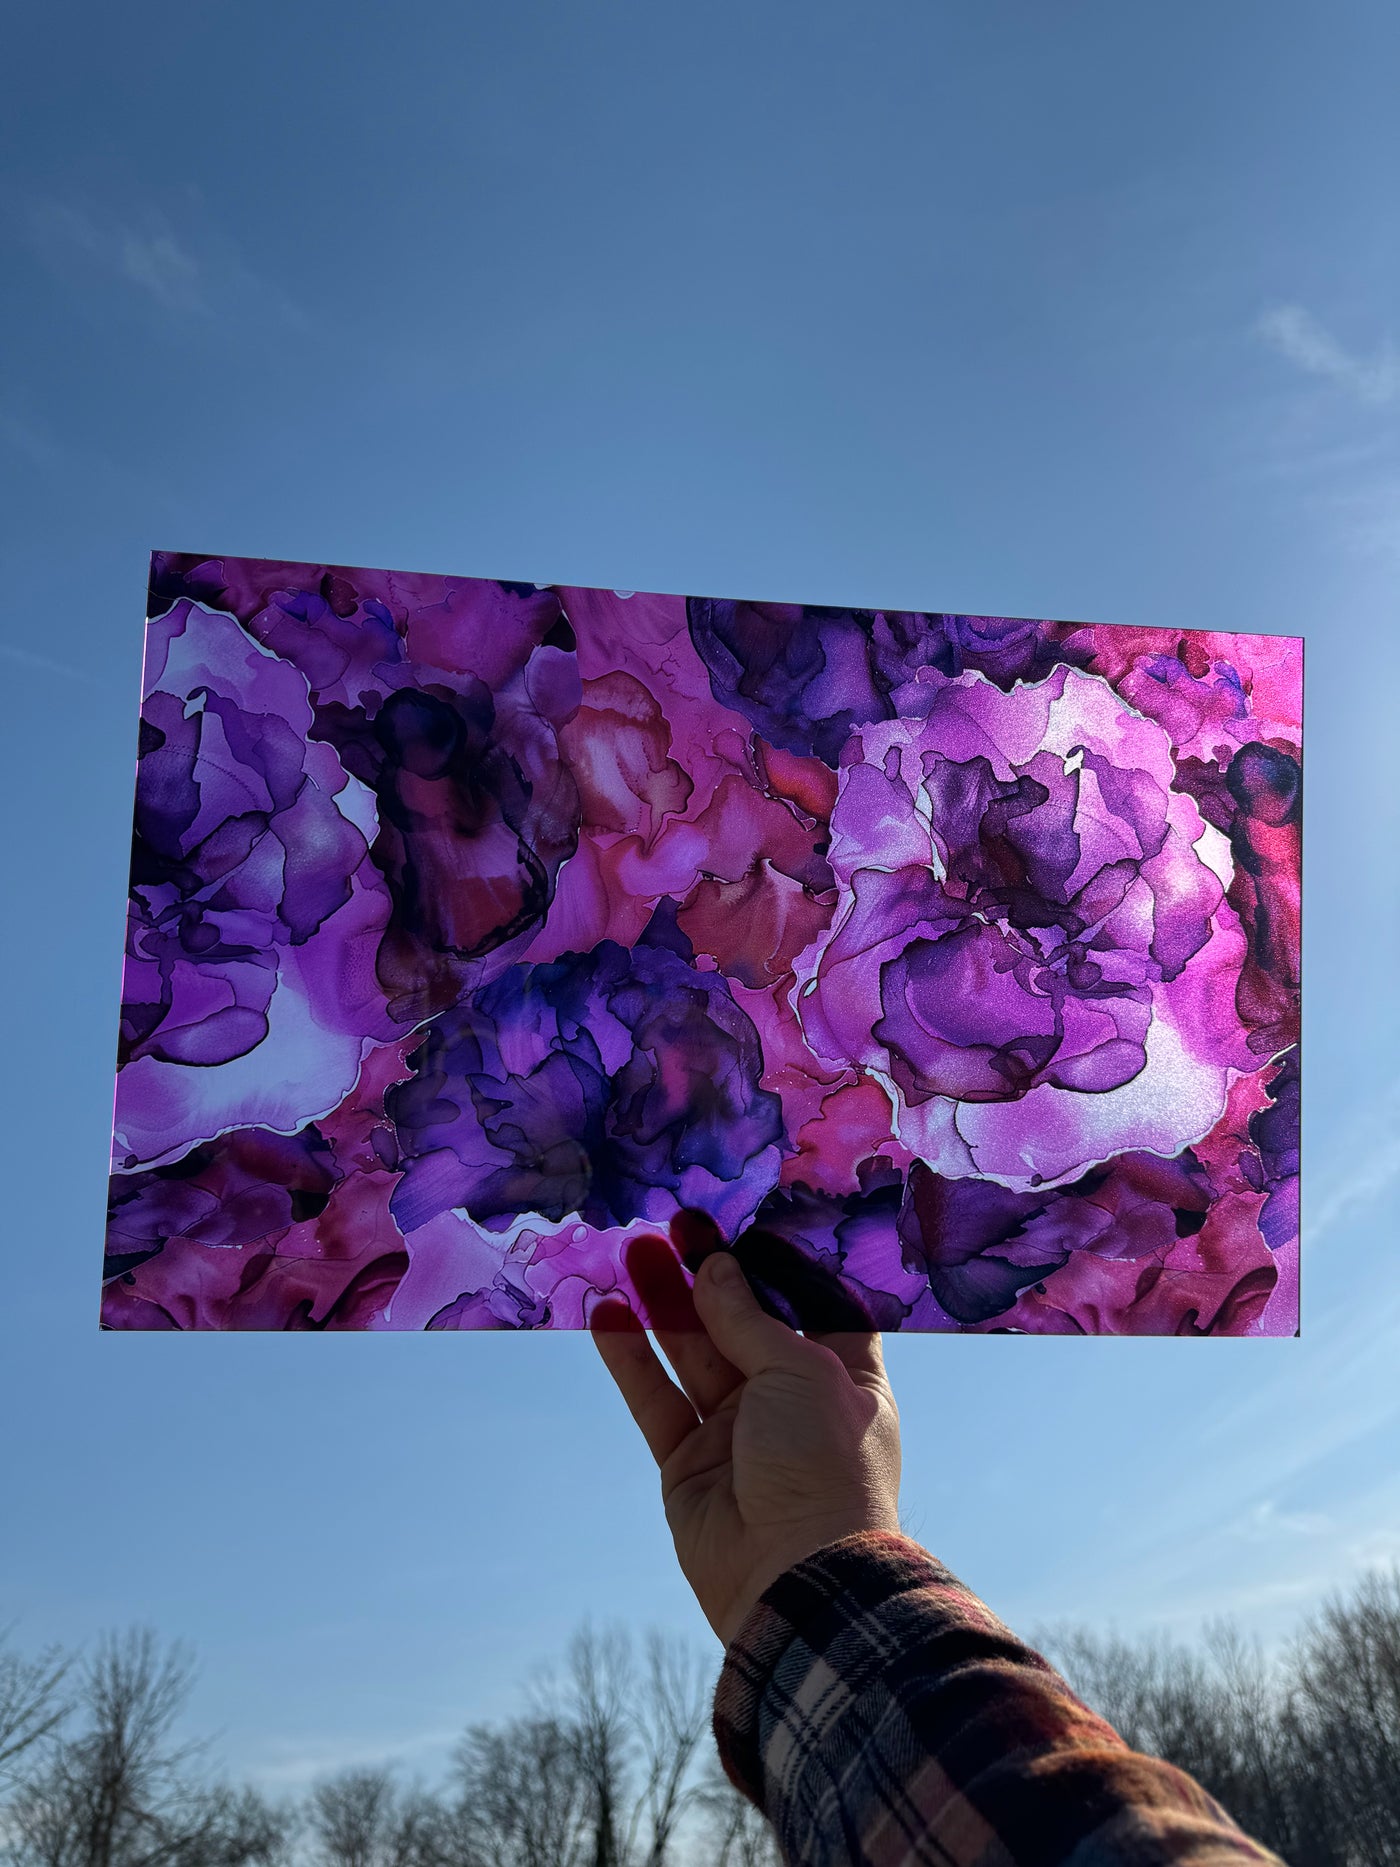 PatternPly® Acrylic Transparent Purple Blooms